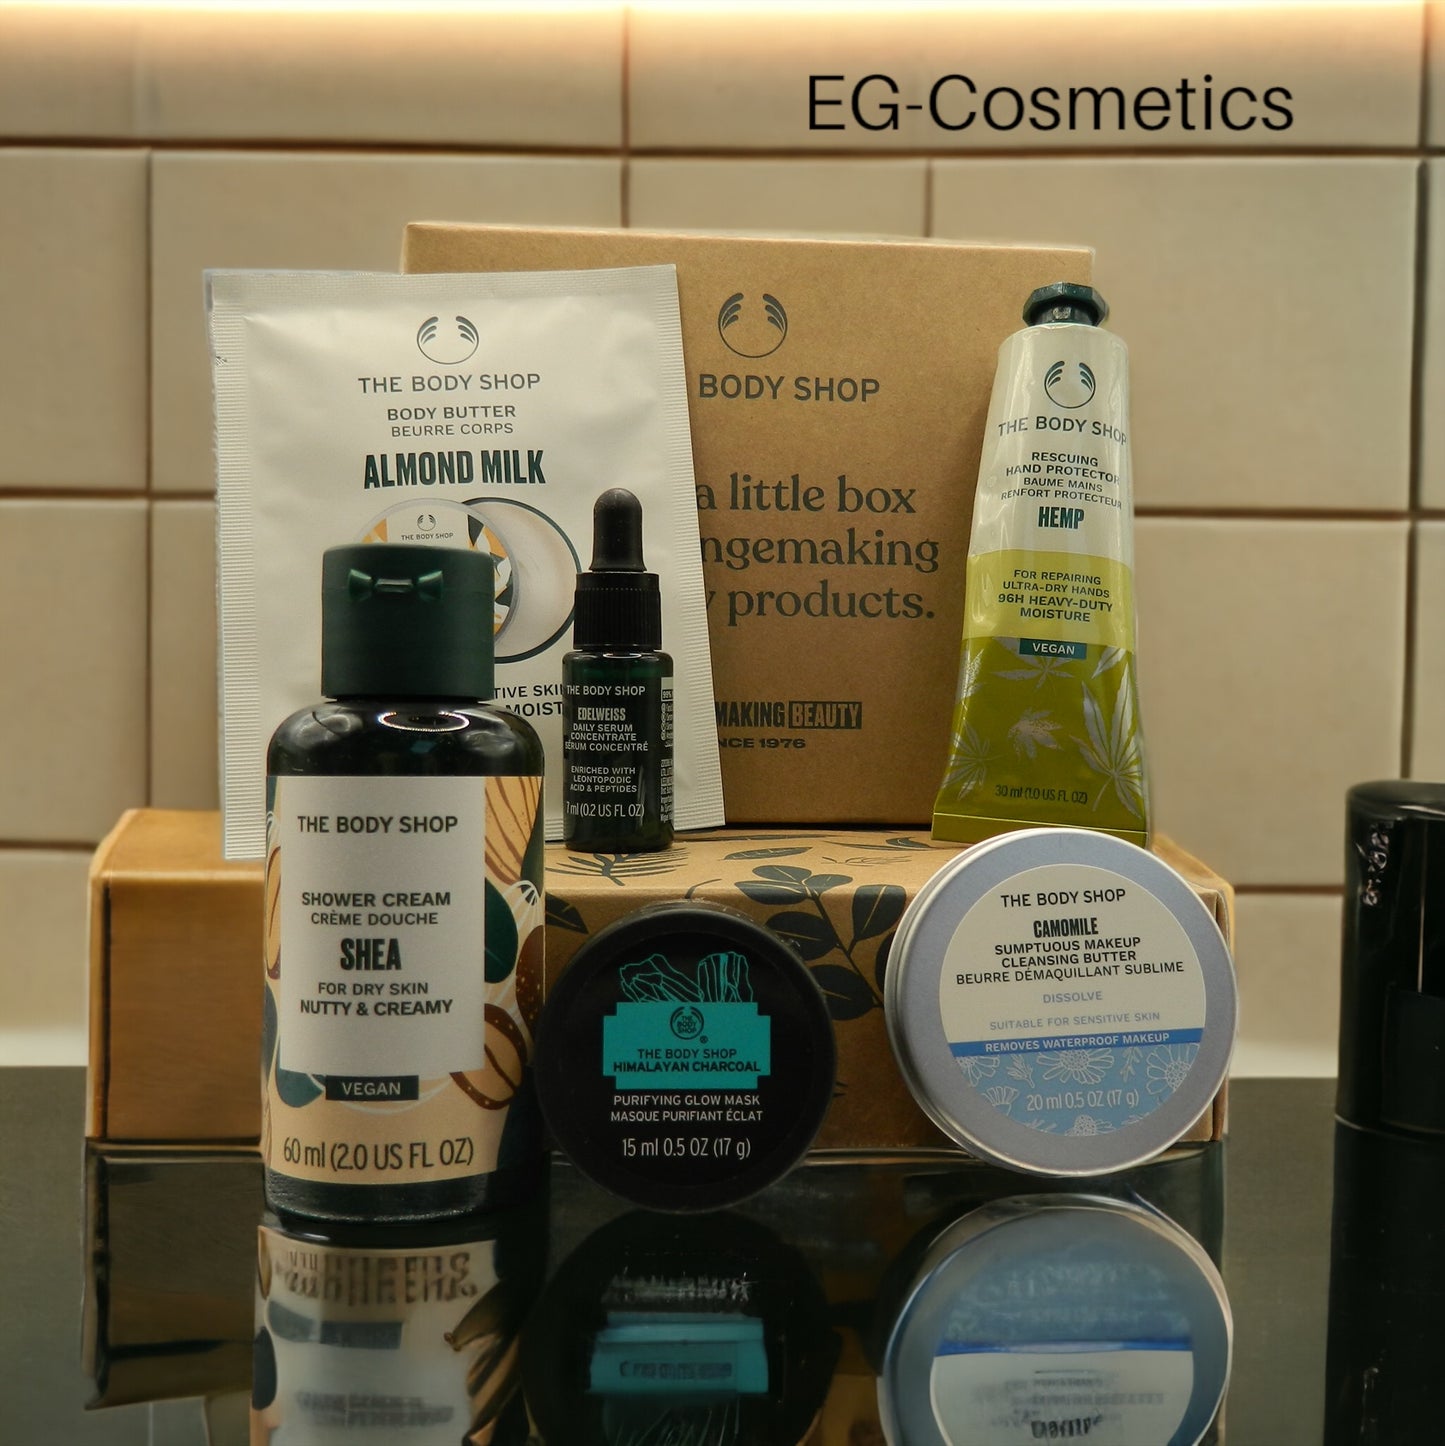 The Body Shop CHANGEMAKERS KIT